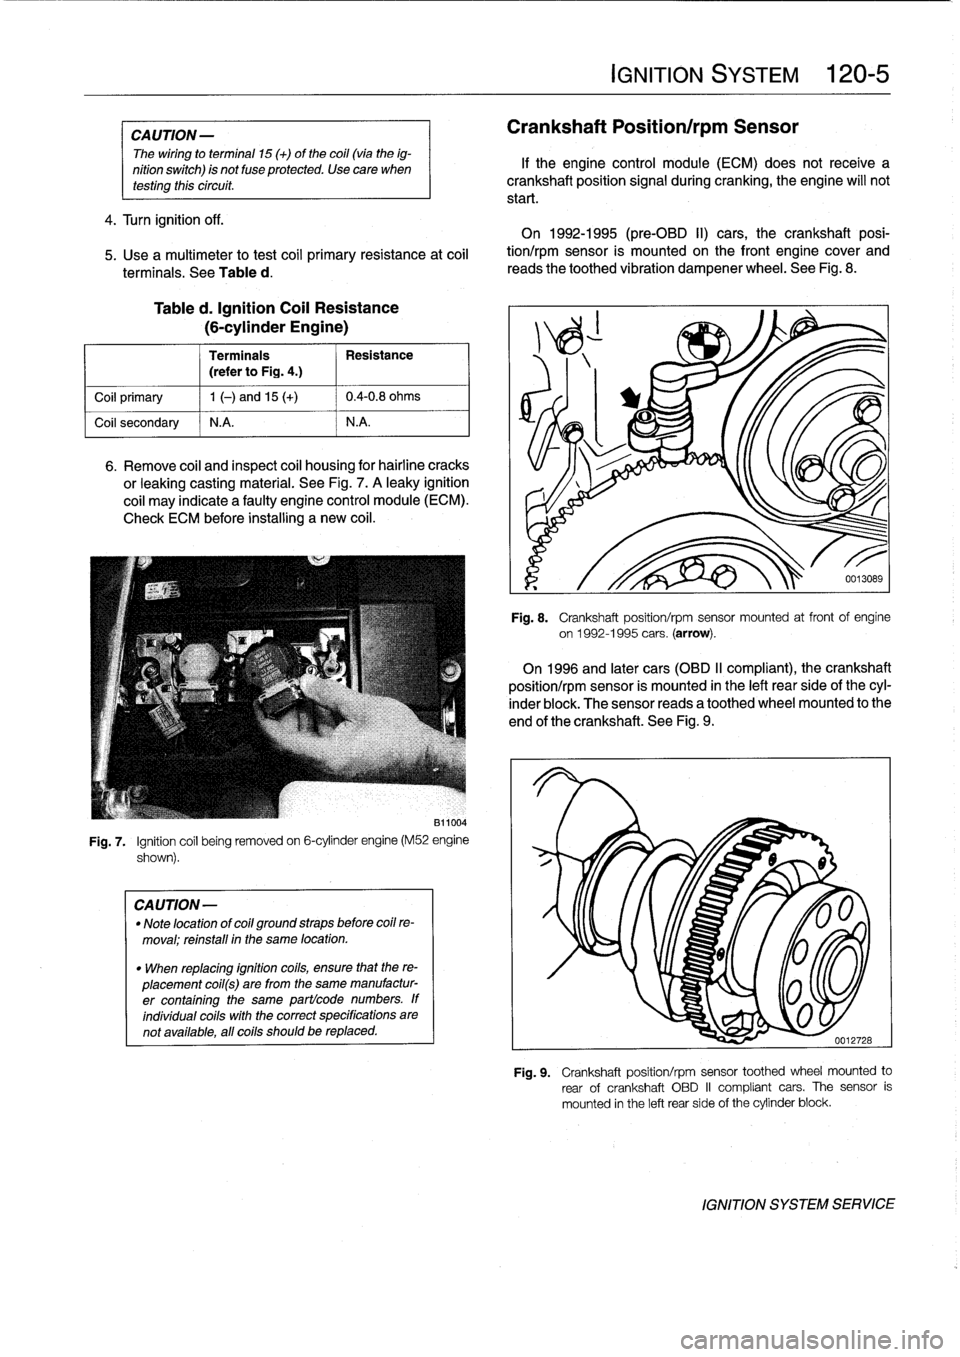 BMW 328i 1995 E36 Workshop Manual 
CAUTION
-

The
wiring
to
termina¡
15
(+)
of
the
coil(vía
the
ig-

nition
switch)
is
not
fuse
protected
.
Use
care
when
testíng
thiscircuit
.

4
.
Turn
ignition
off
.

5
.
Use
a
multimeter
to
test
